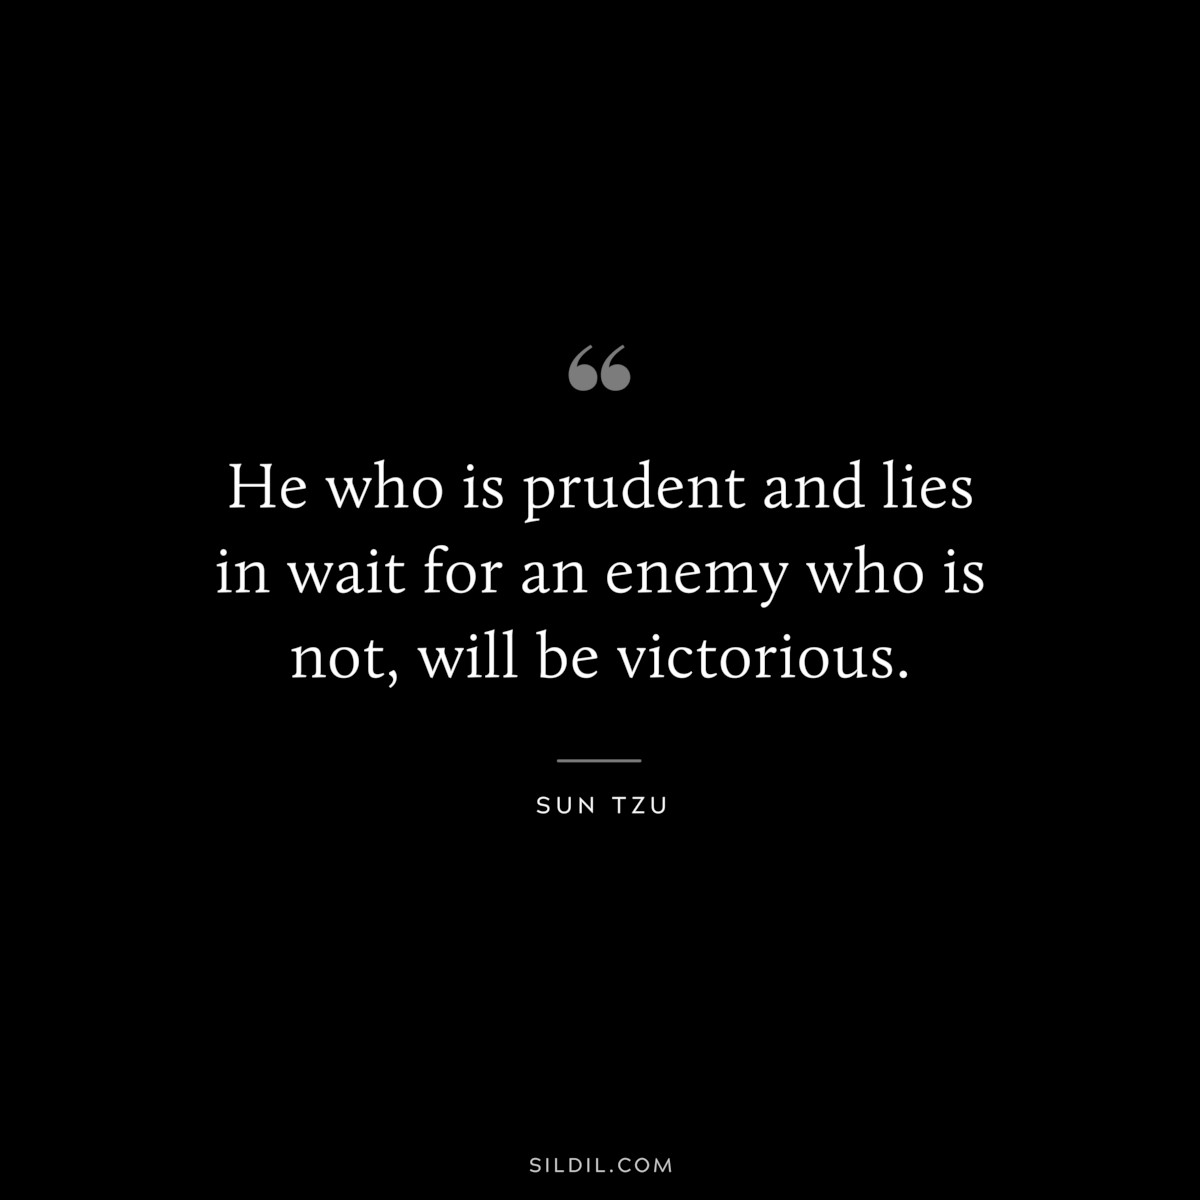 He who is prudent and lies in wait for an enemy who is not, will be victorious.― Sun Tzu